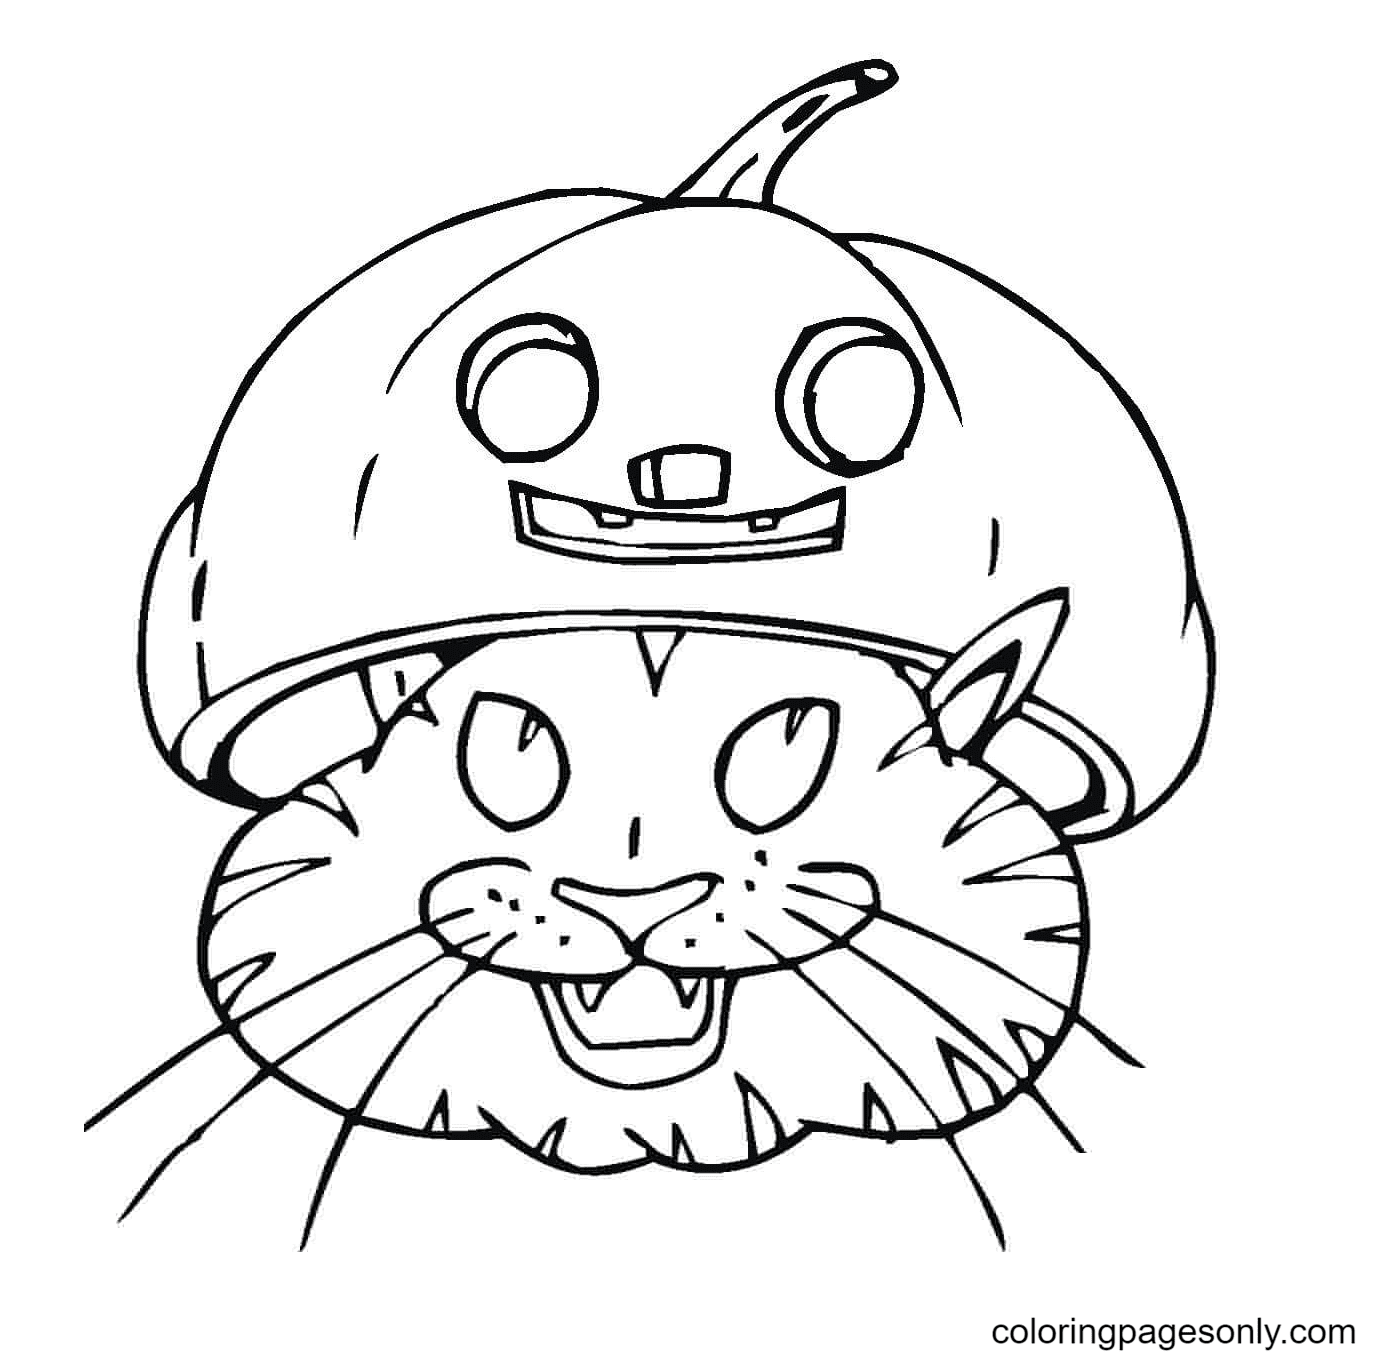 Black Cat In Jack o’ lantern Coloring Pages